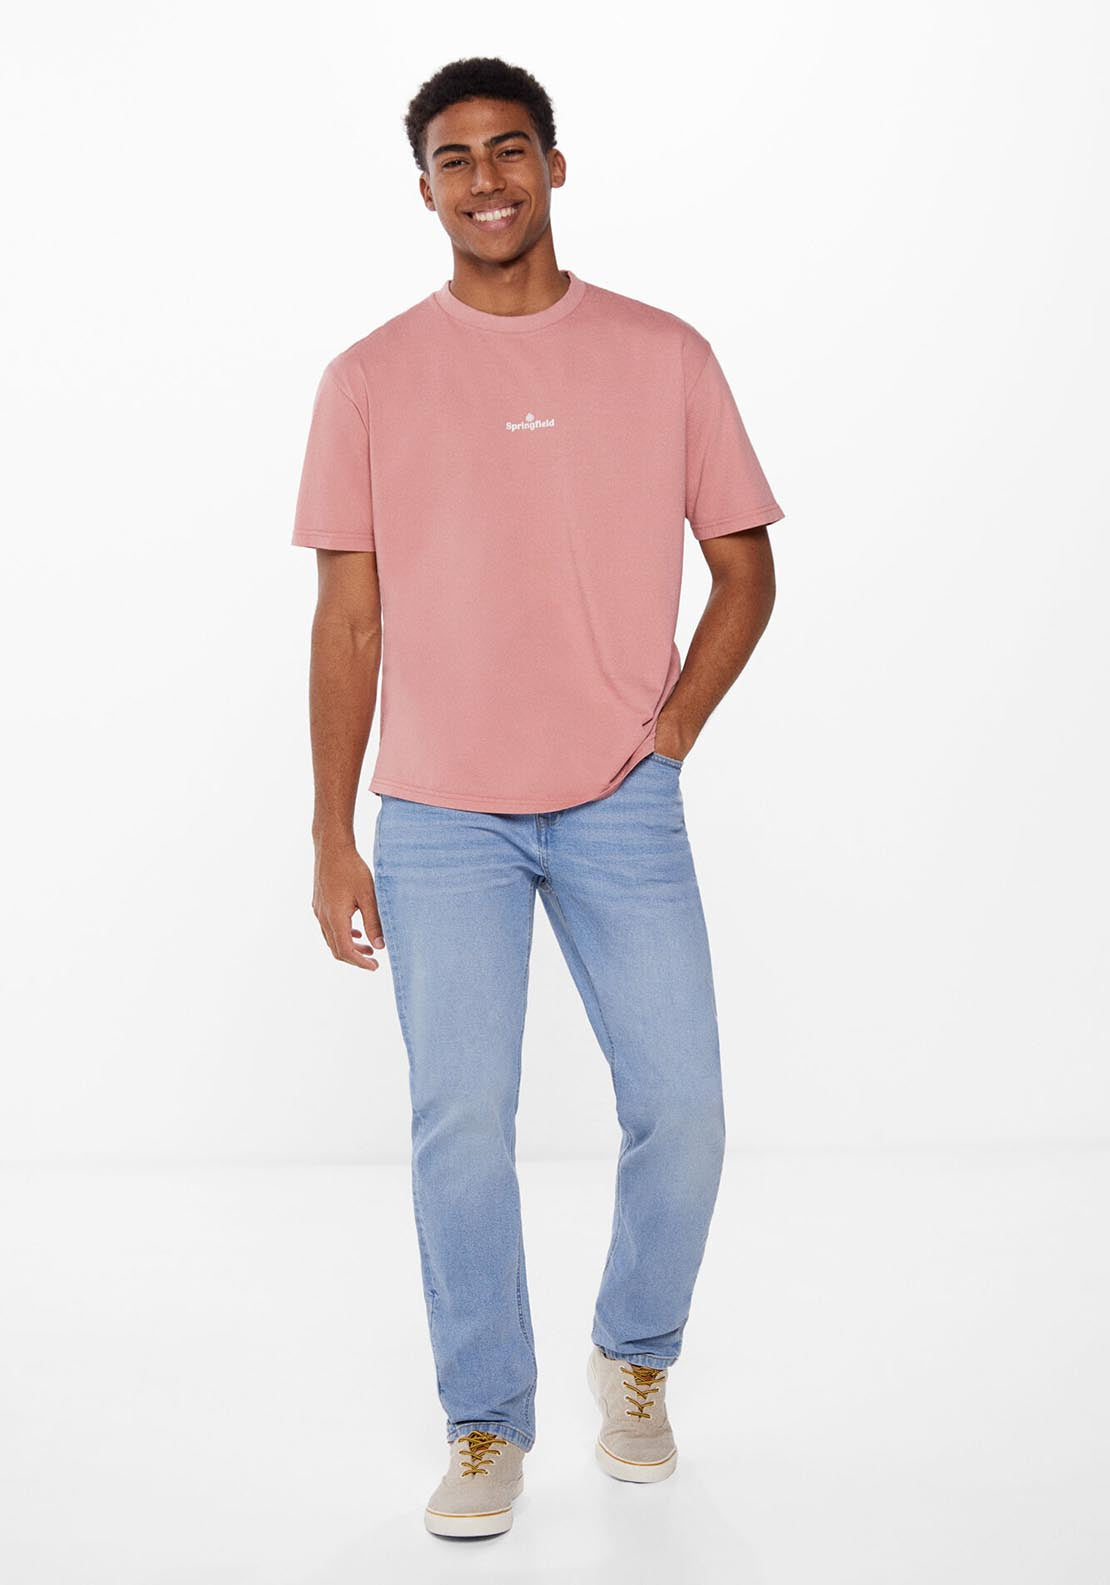 Springfield Washed T-shirt with logo - Pink 2 Shaws Department Stores